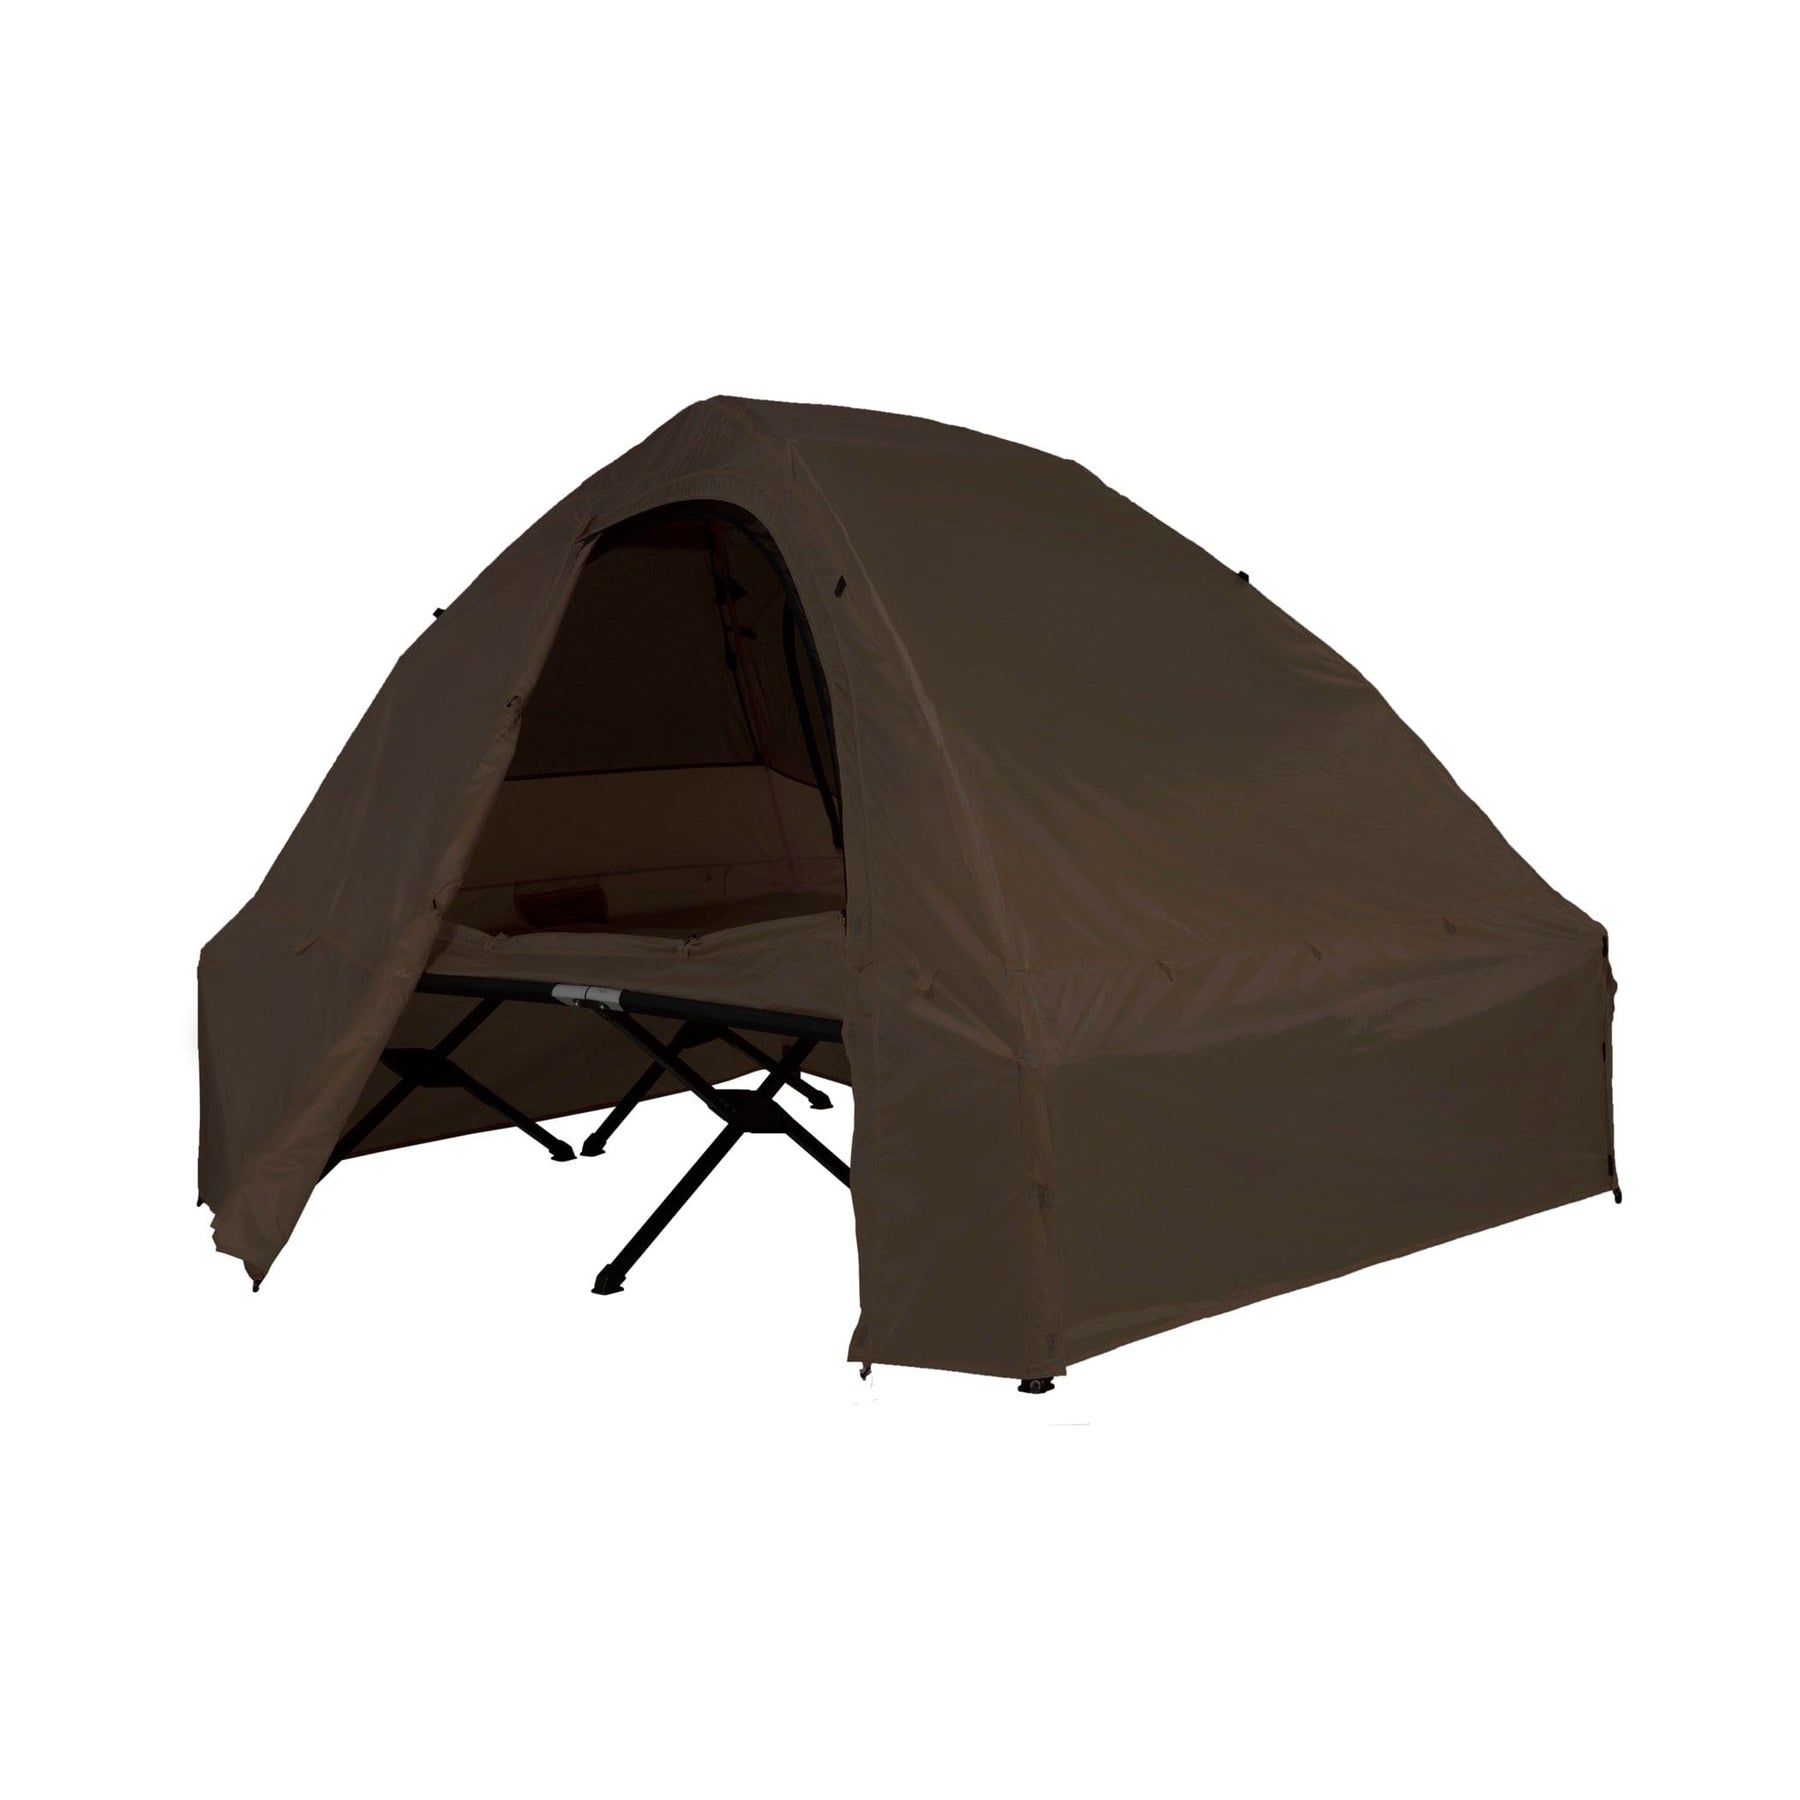 TETON Sports Vista 2 Elite Extended Length Rainfly Tent & Cot Cover Brown 2004BR